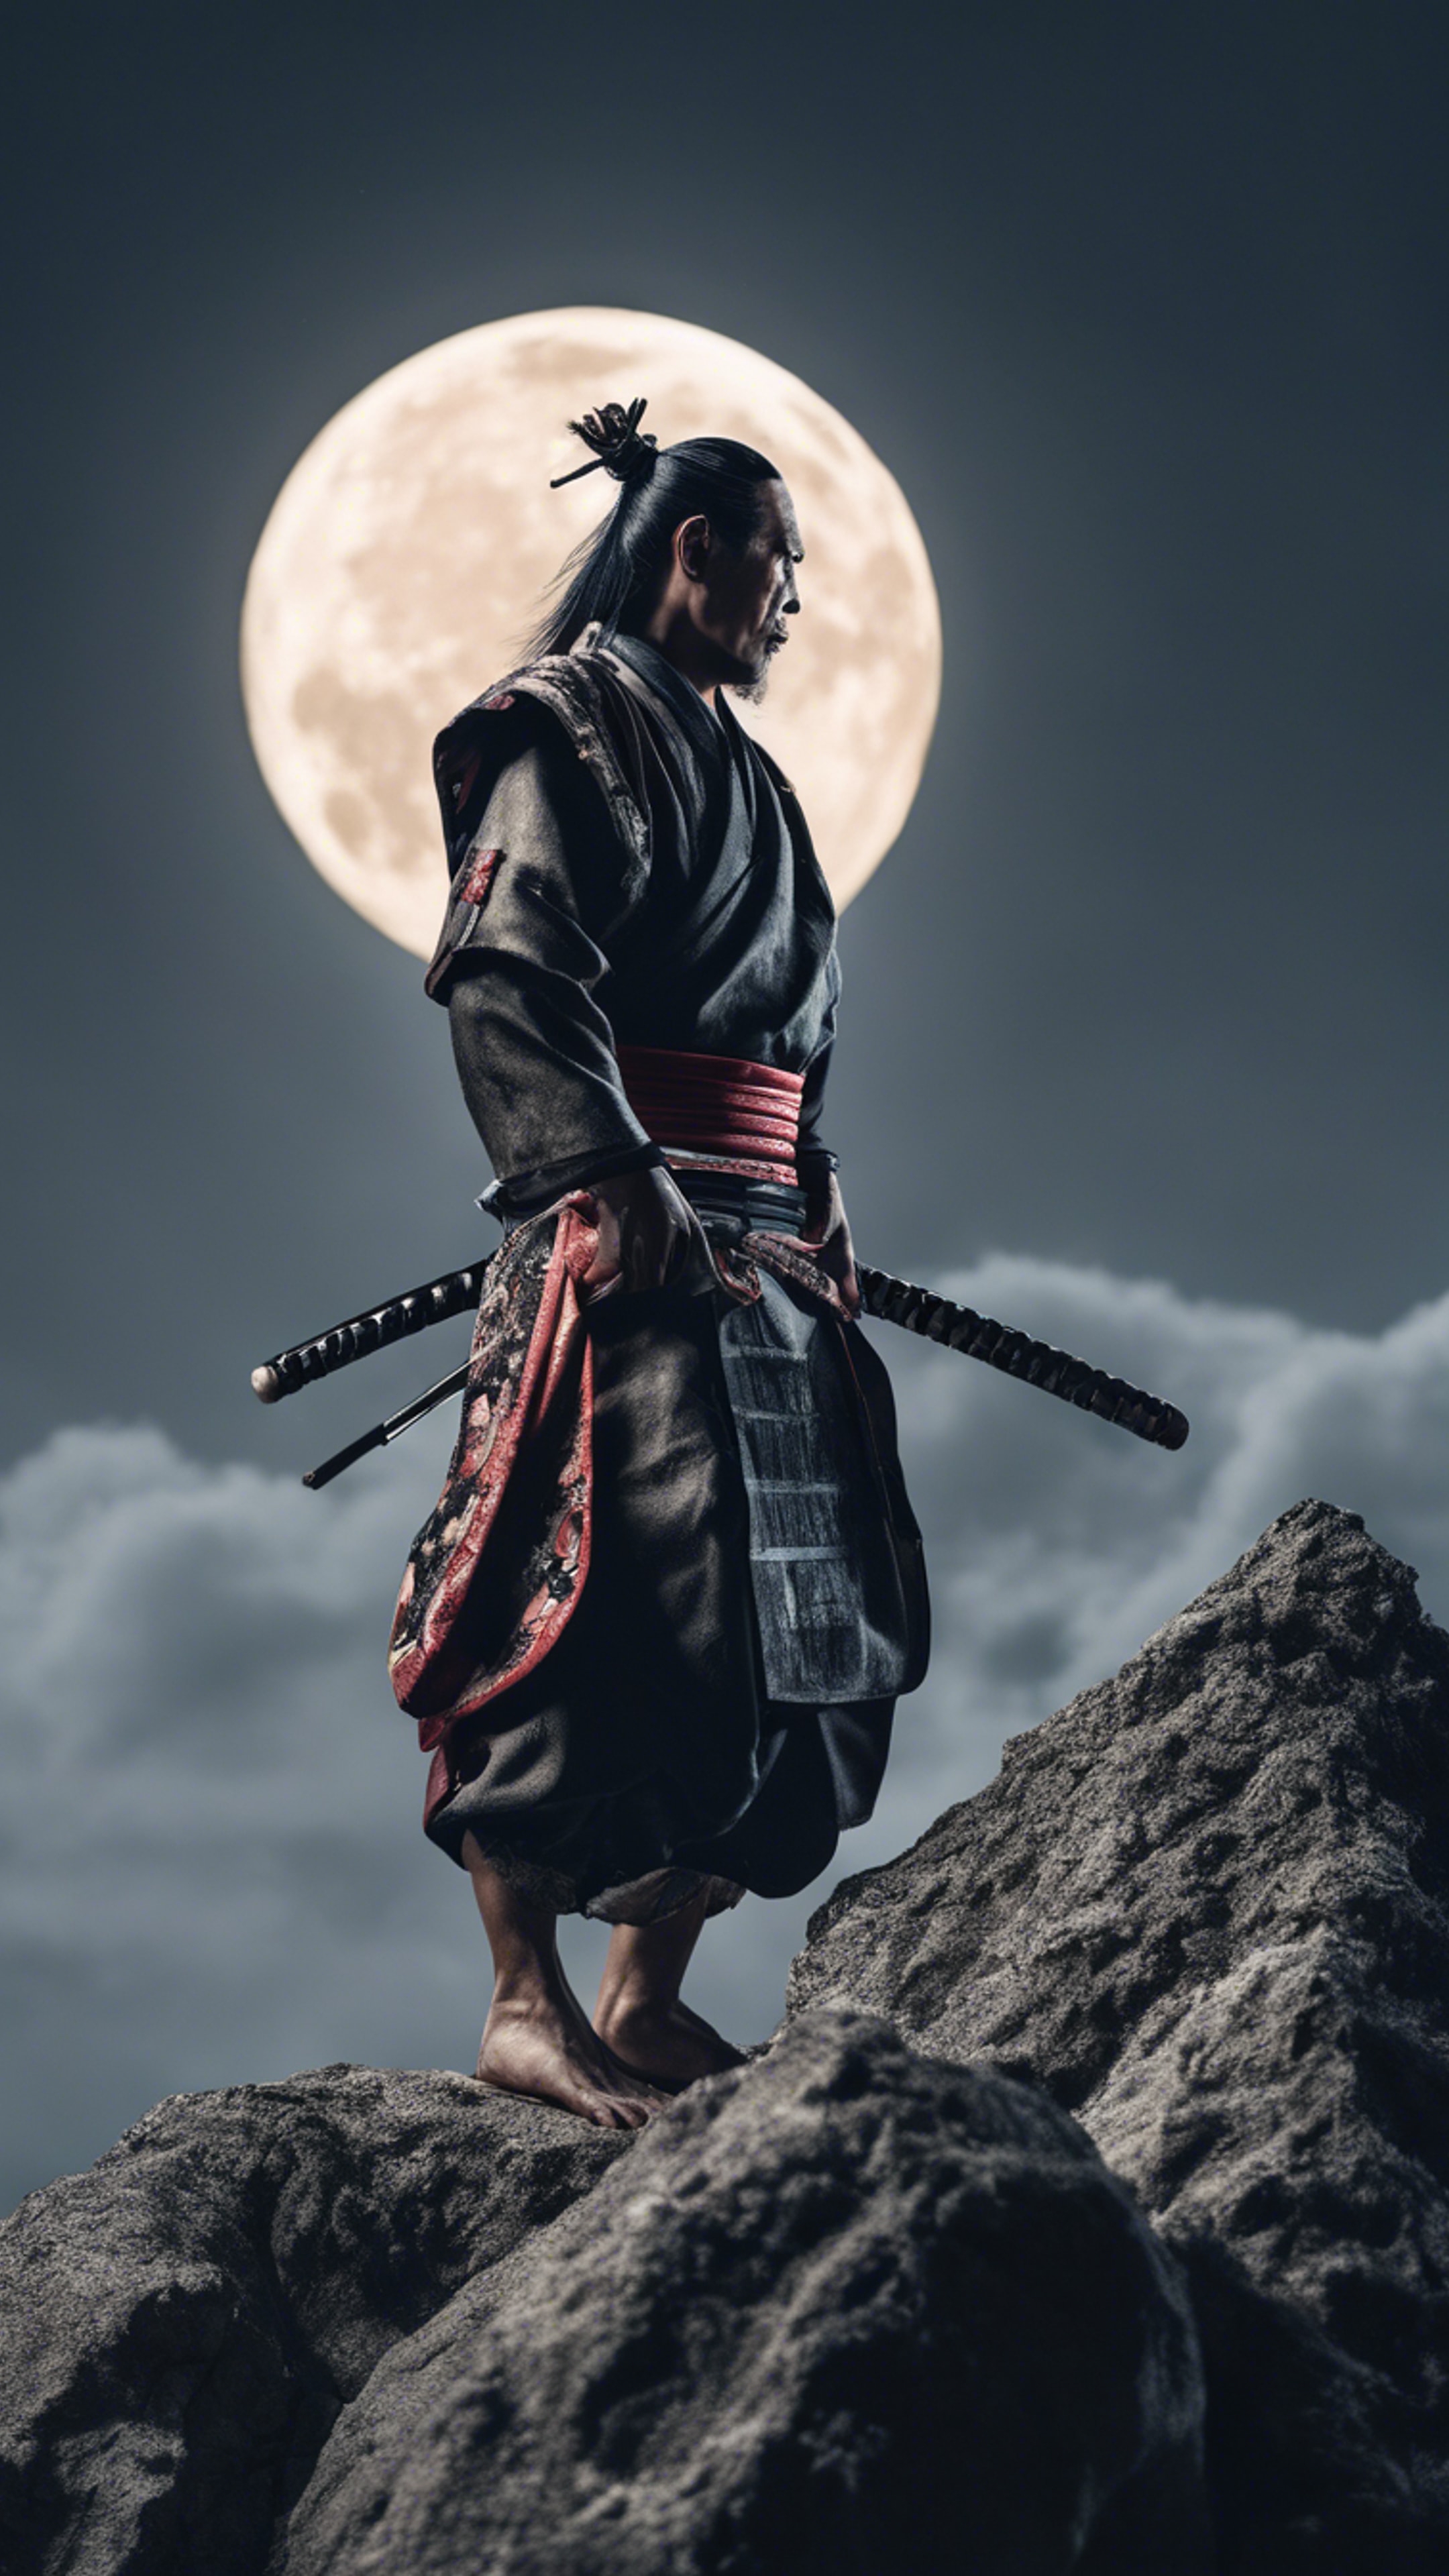 A dignified samurai standing on a rocky cliff under a full moon Ფონი[853d4aeee7284f1d8df3]